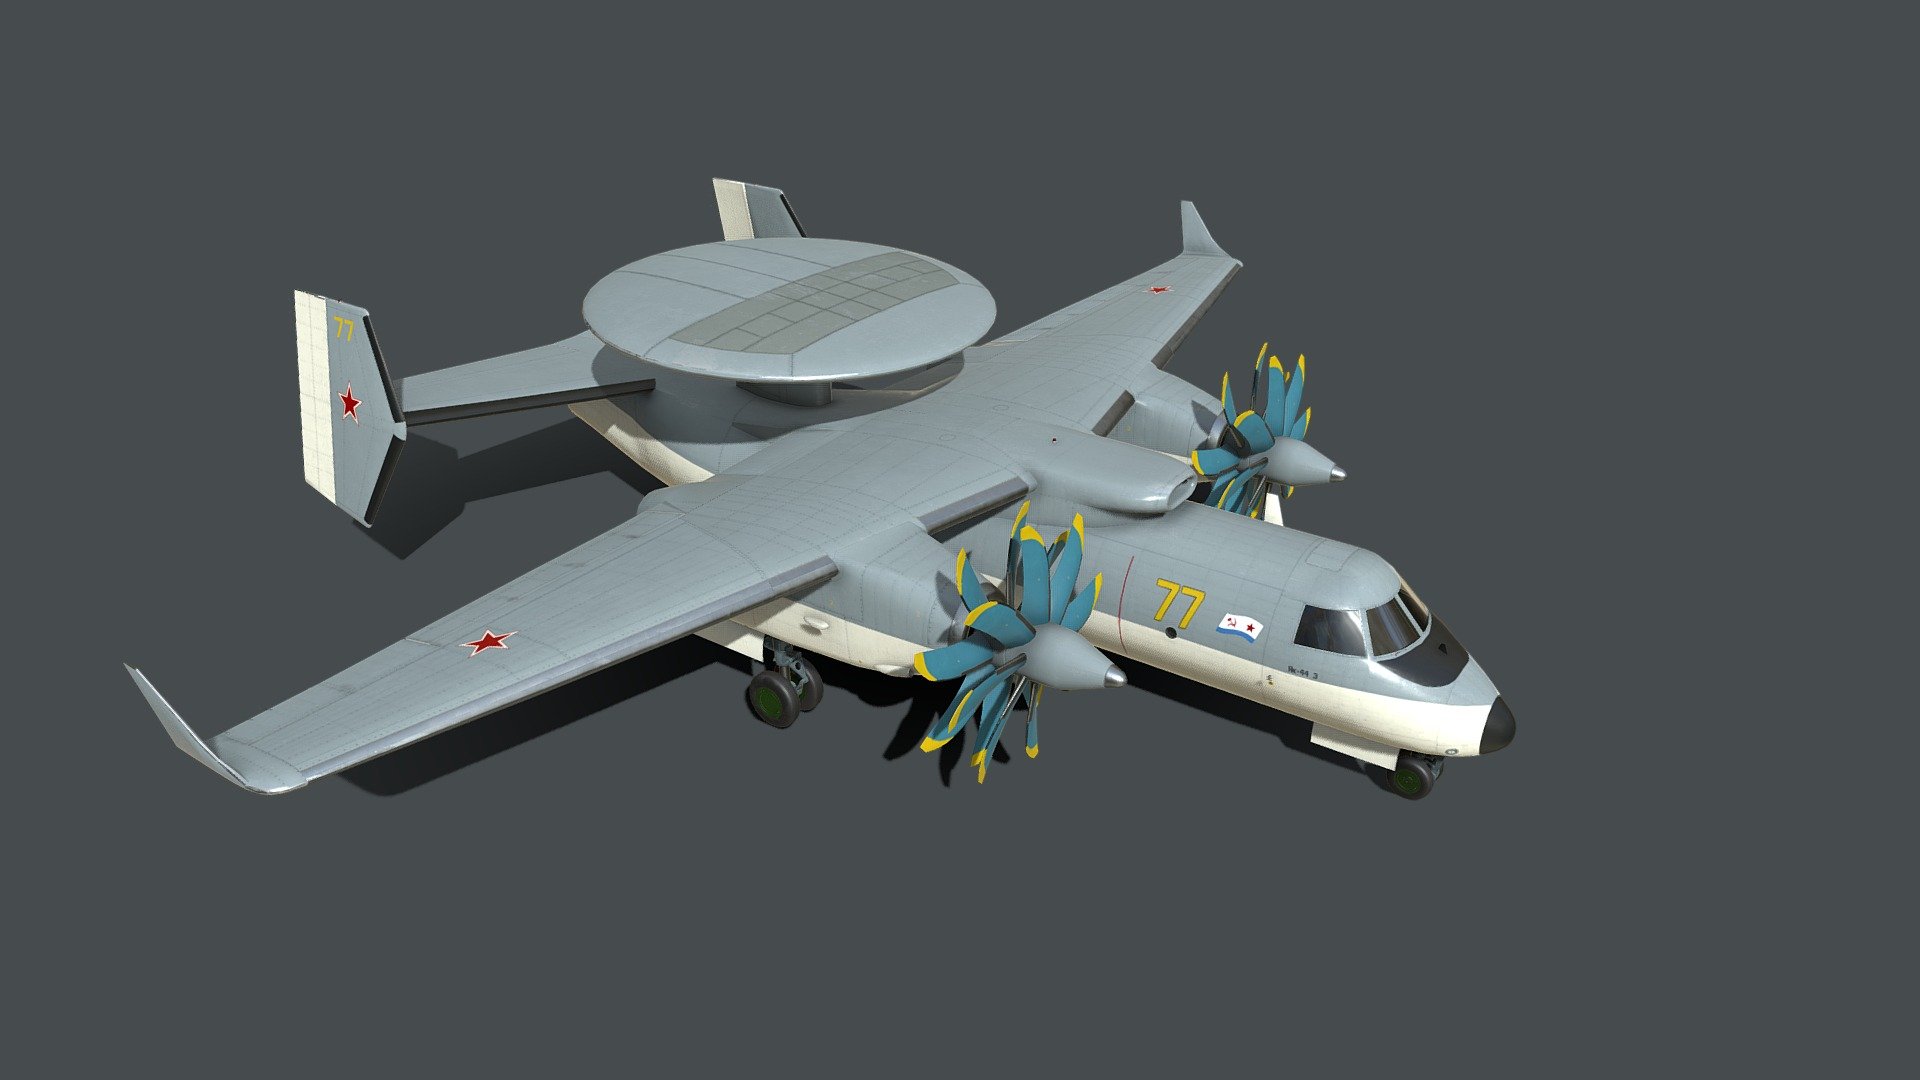 The Yakovlev Yak-44 (Russian: Як-44) was a proposed twin-turboprop Airborne Early Warning (AEW) aircraft, resembling the United States Navy's E-2 Hawkeye, intended for use with the Soviet Navy's Ulyanovsk class supercarriers. Along with the aircraft carrier it would have flown from, the Yak-44 was cancelled after the demise of the Soviet Union. A full-scale mockup with foldable wings was built 3d model